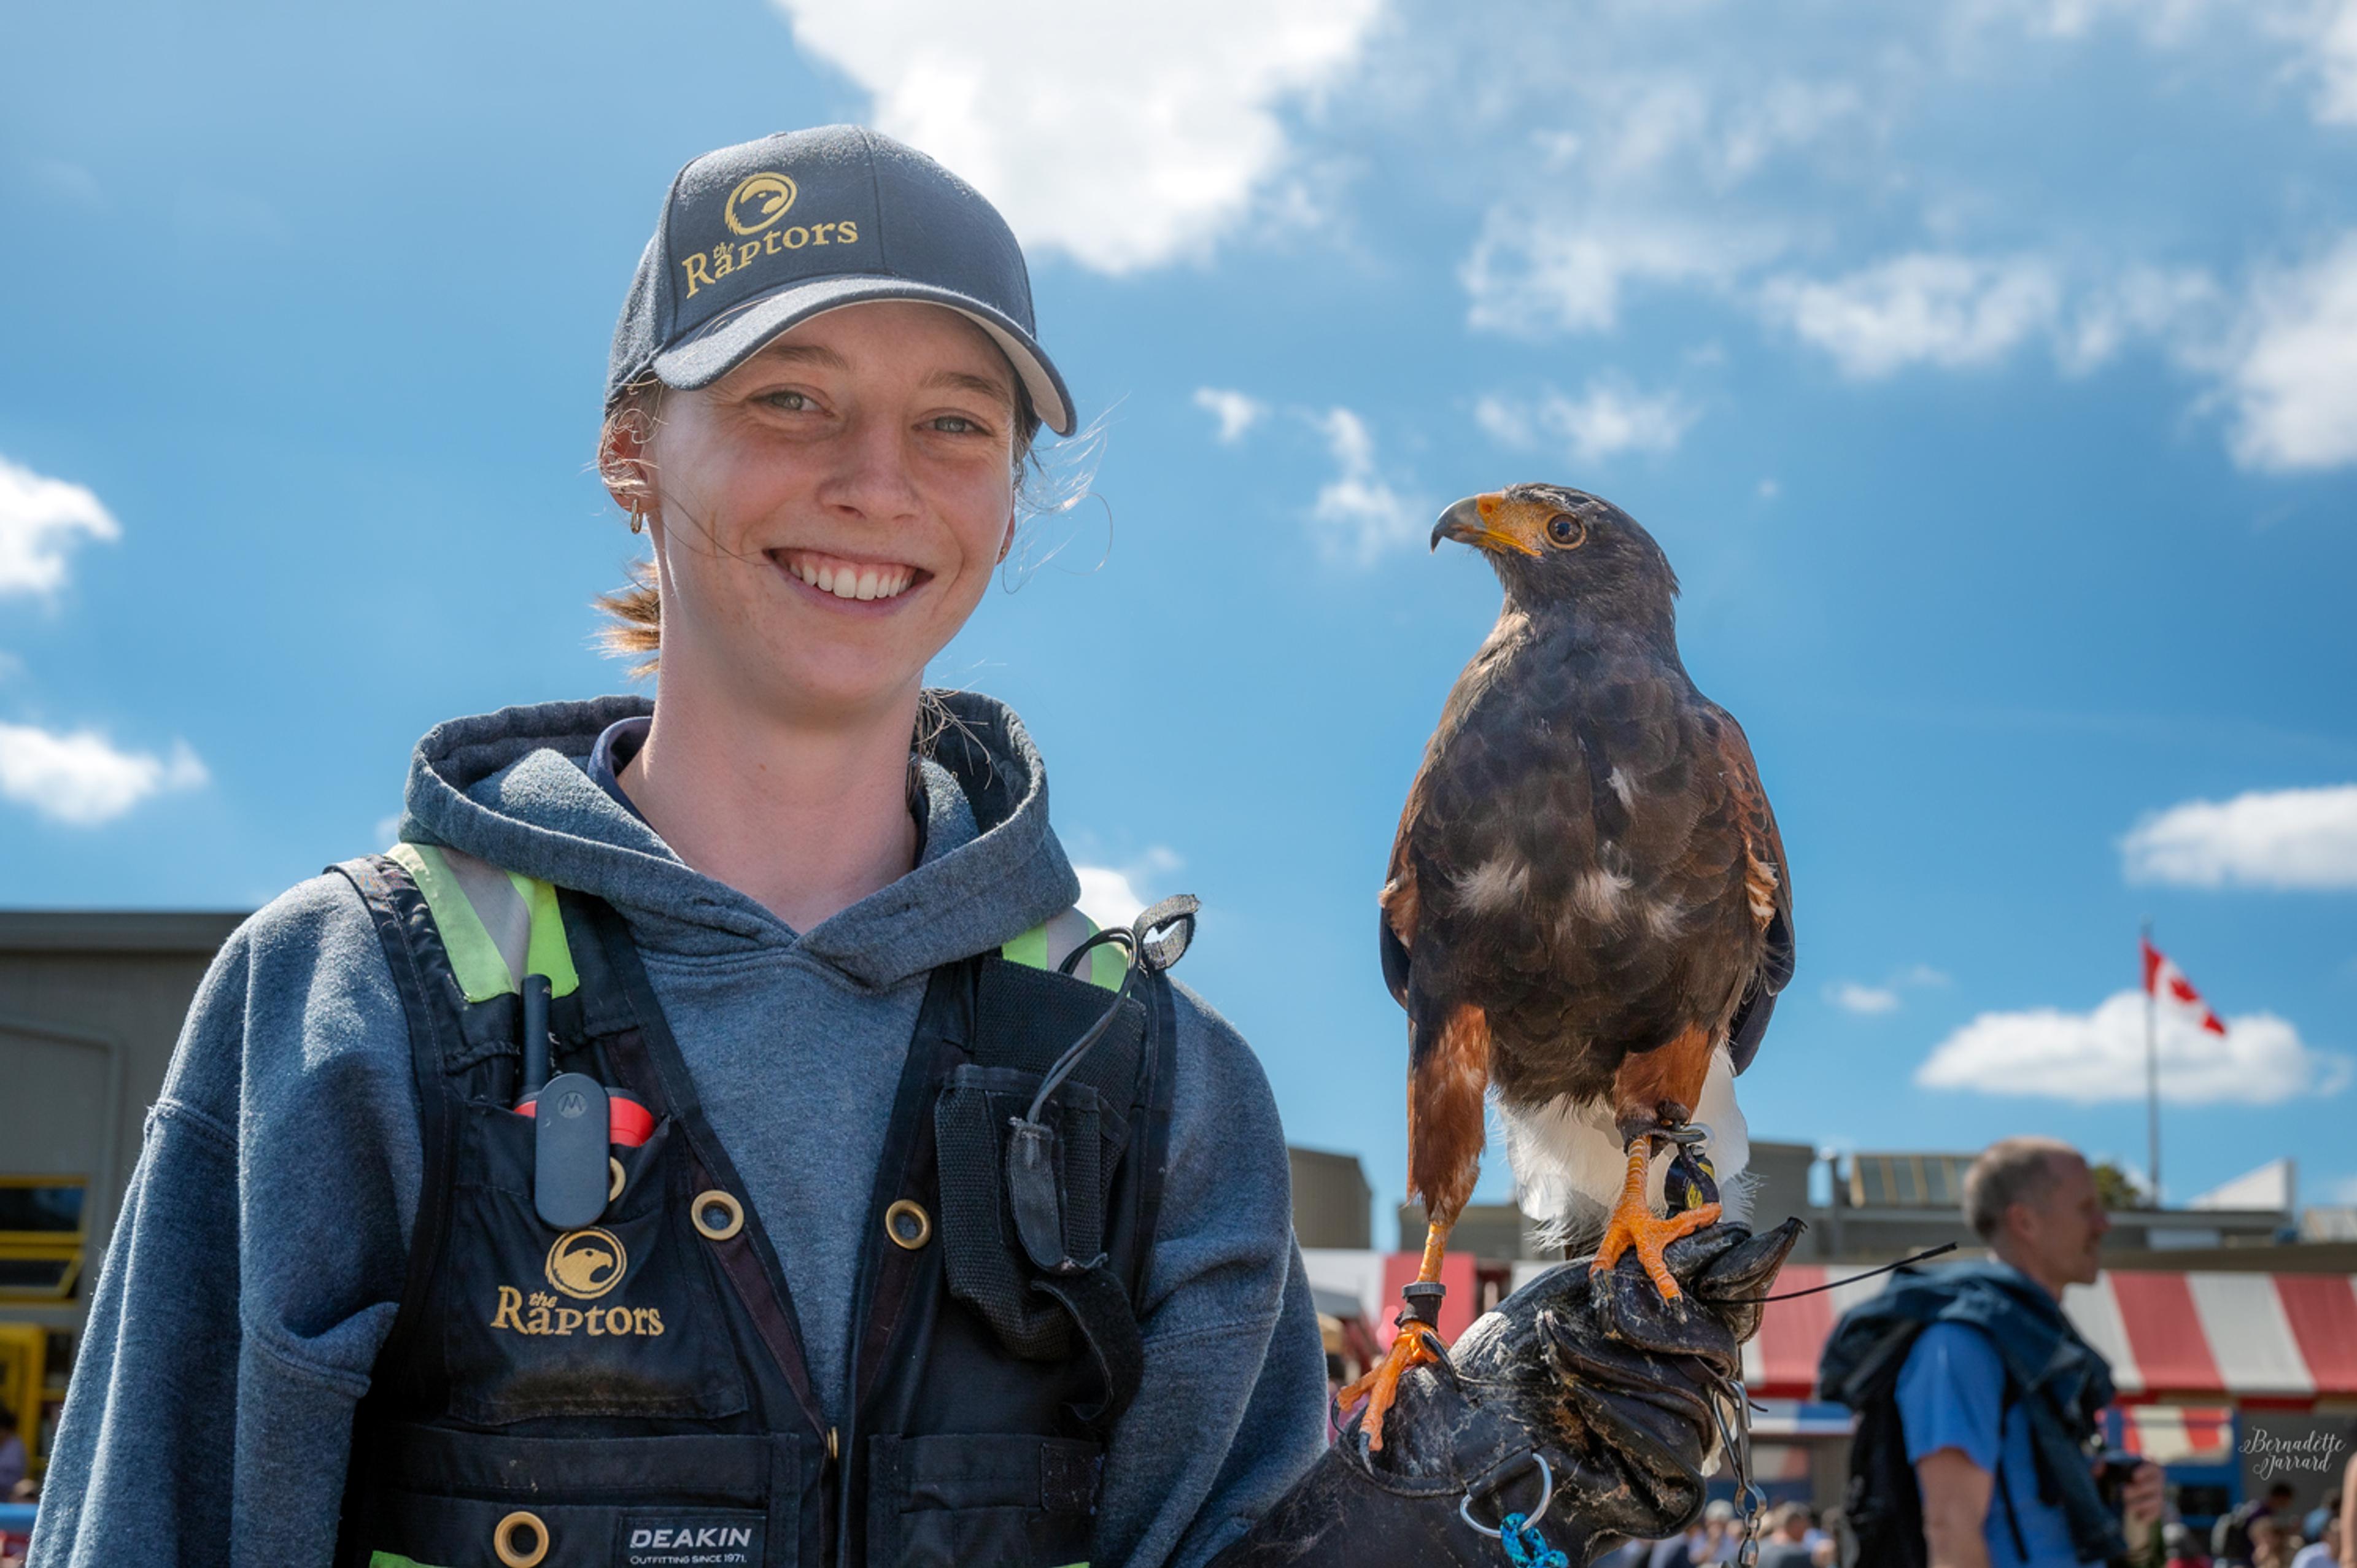 Raptors employee stands in a market with a hawk on her glove